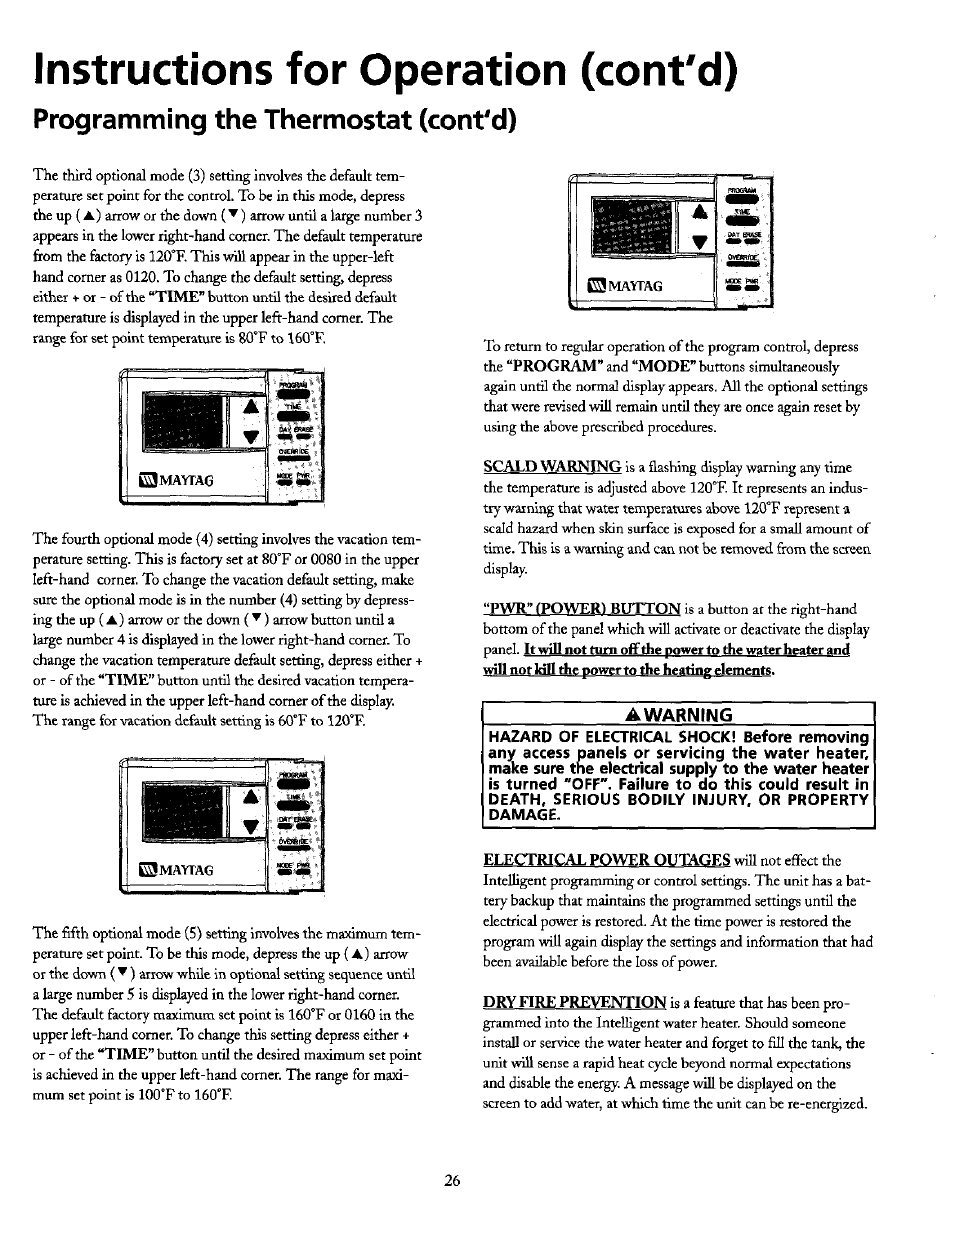 Instructions for operation (cont'd), Programming the thermostat (cont'd) | Maytag HE21250PC User Manual | Page 26 / 40